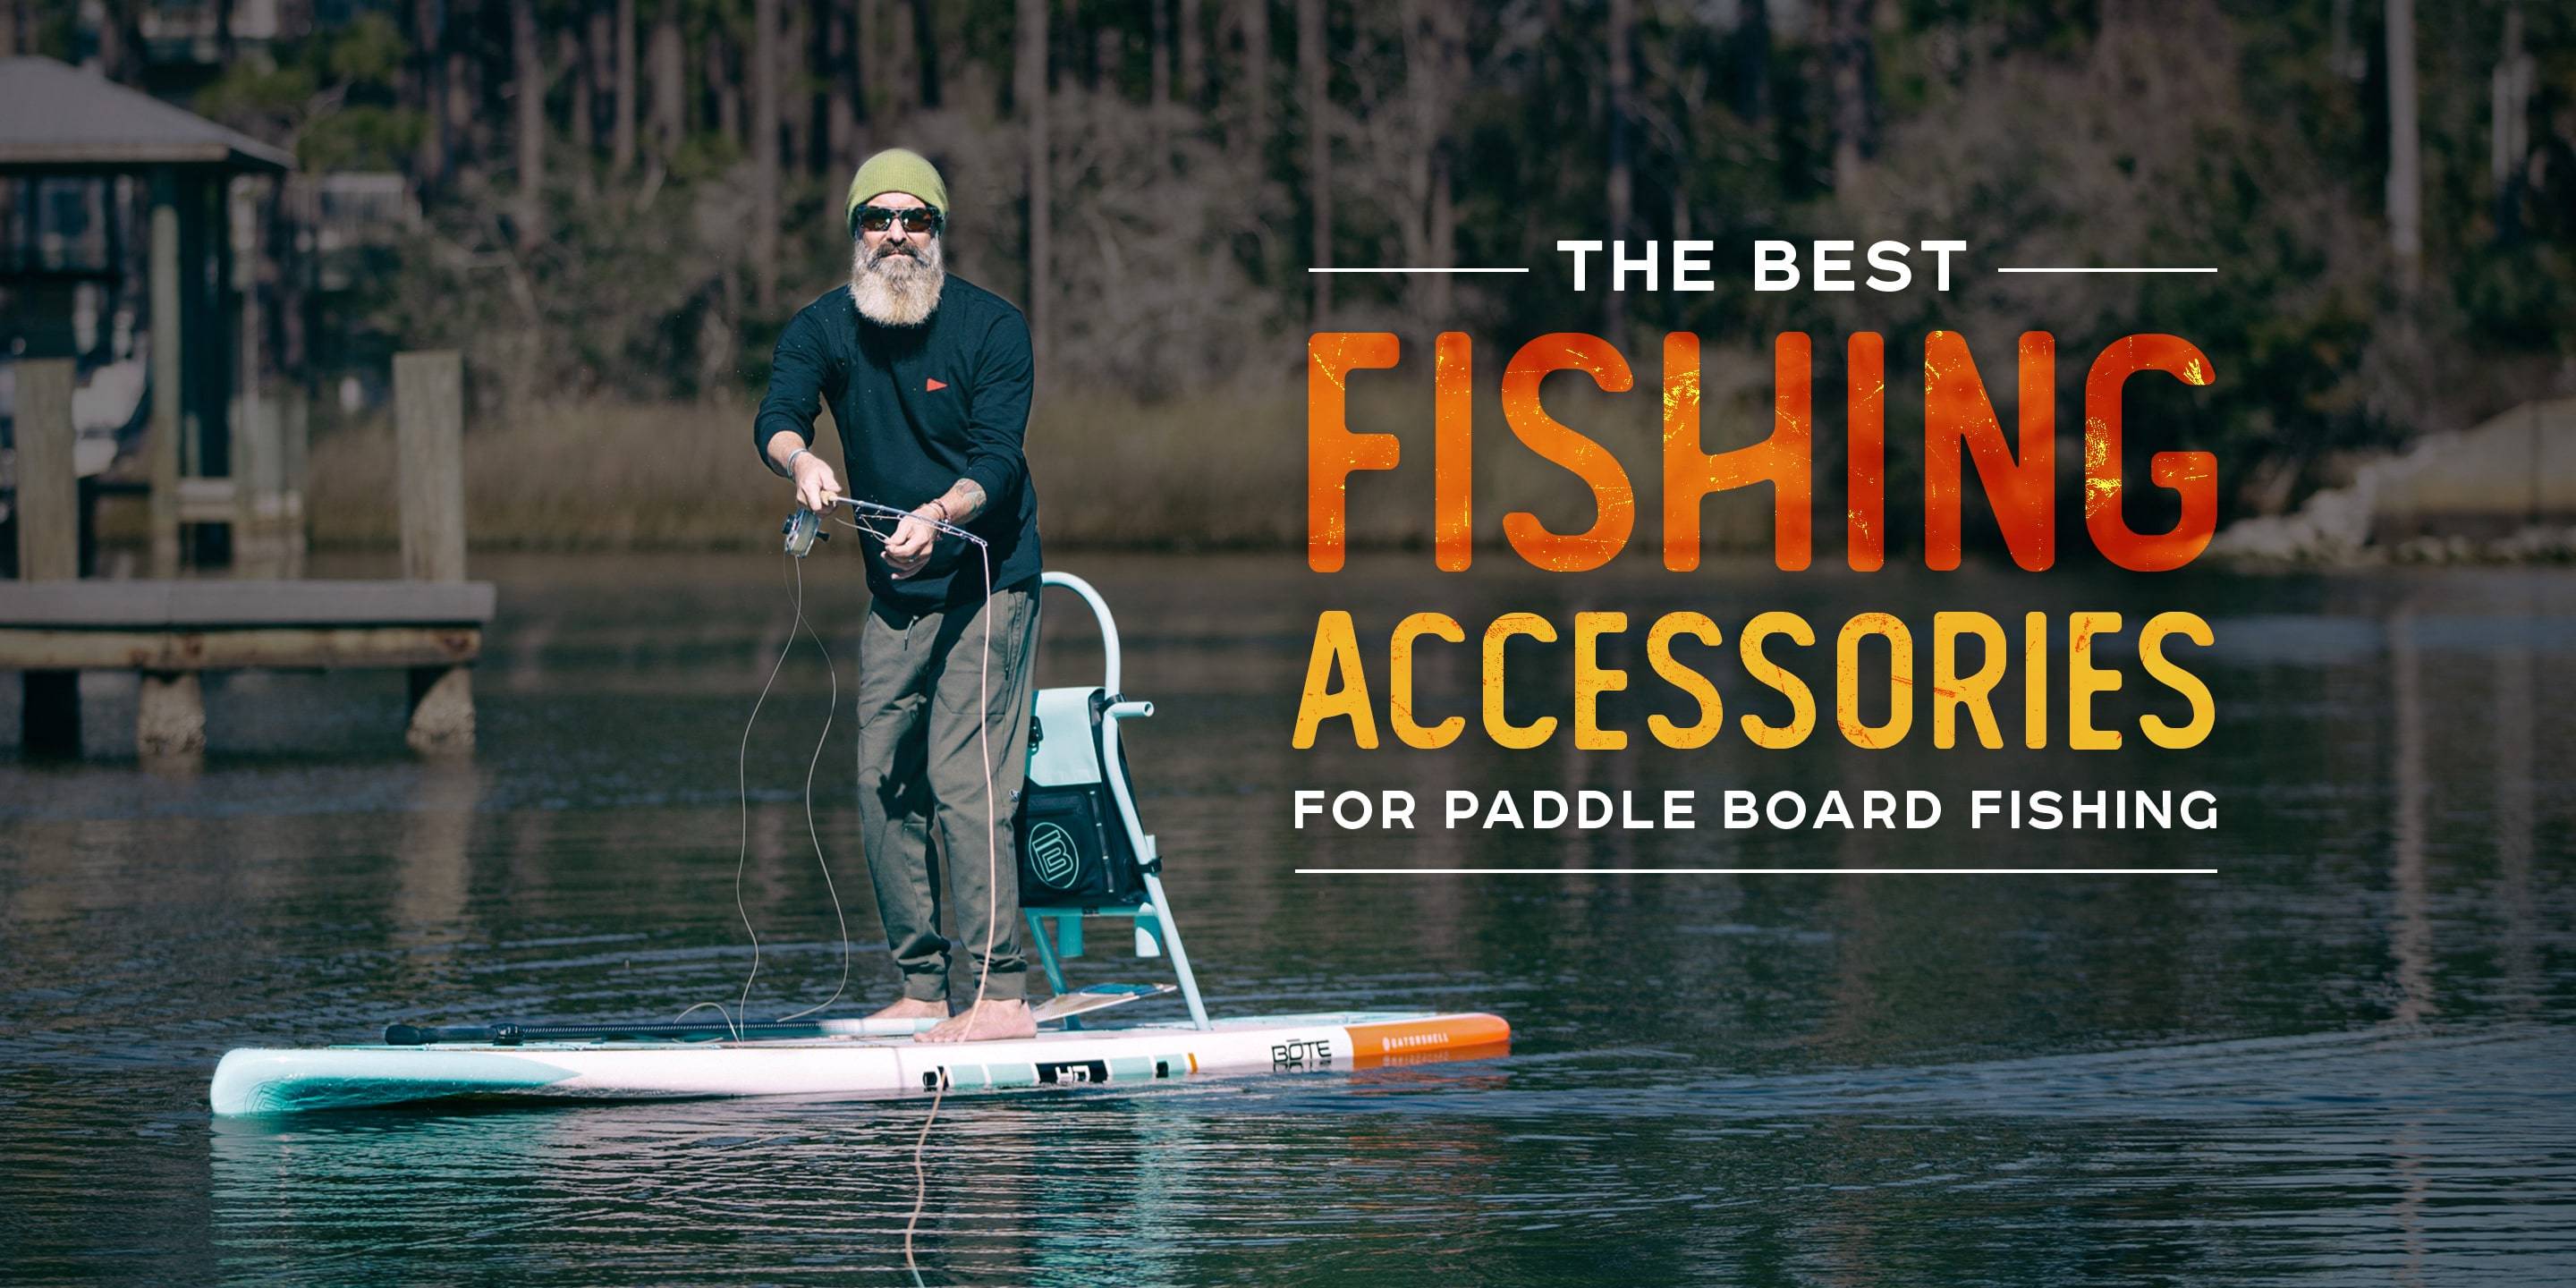 The Best Fishing Accessories for Paddle Board Fishing